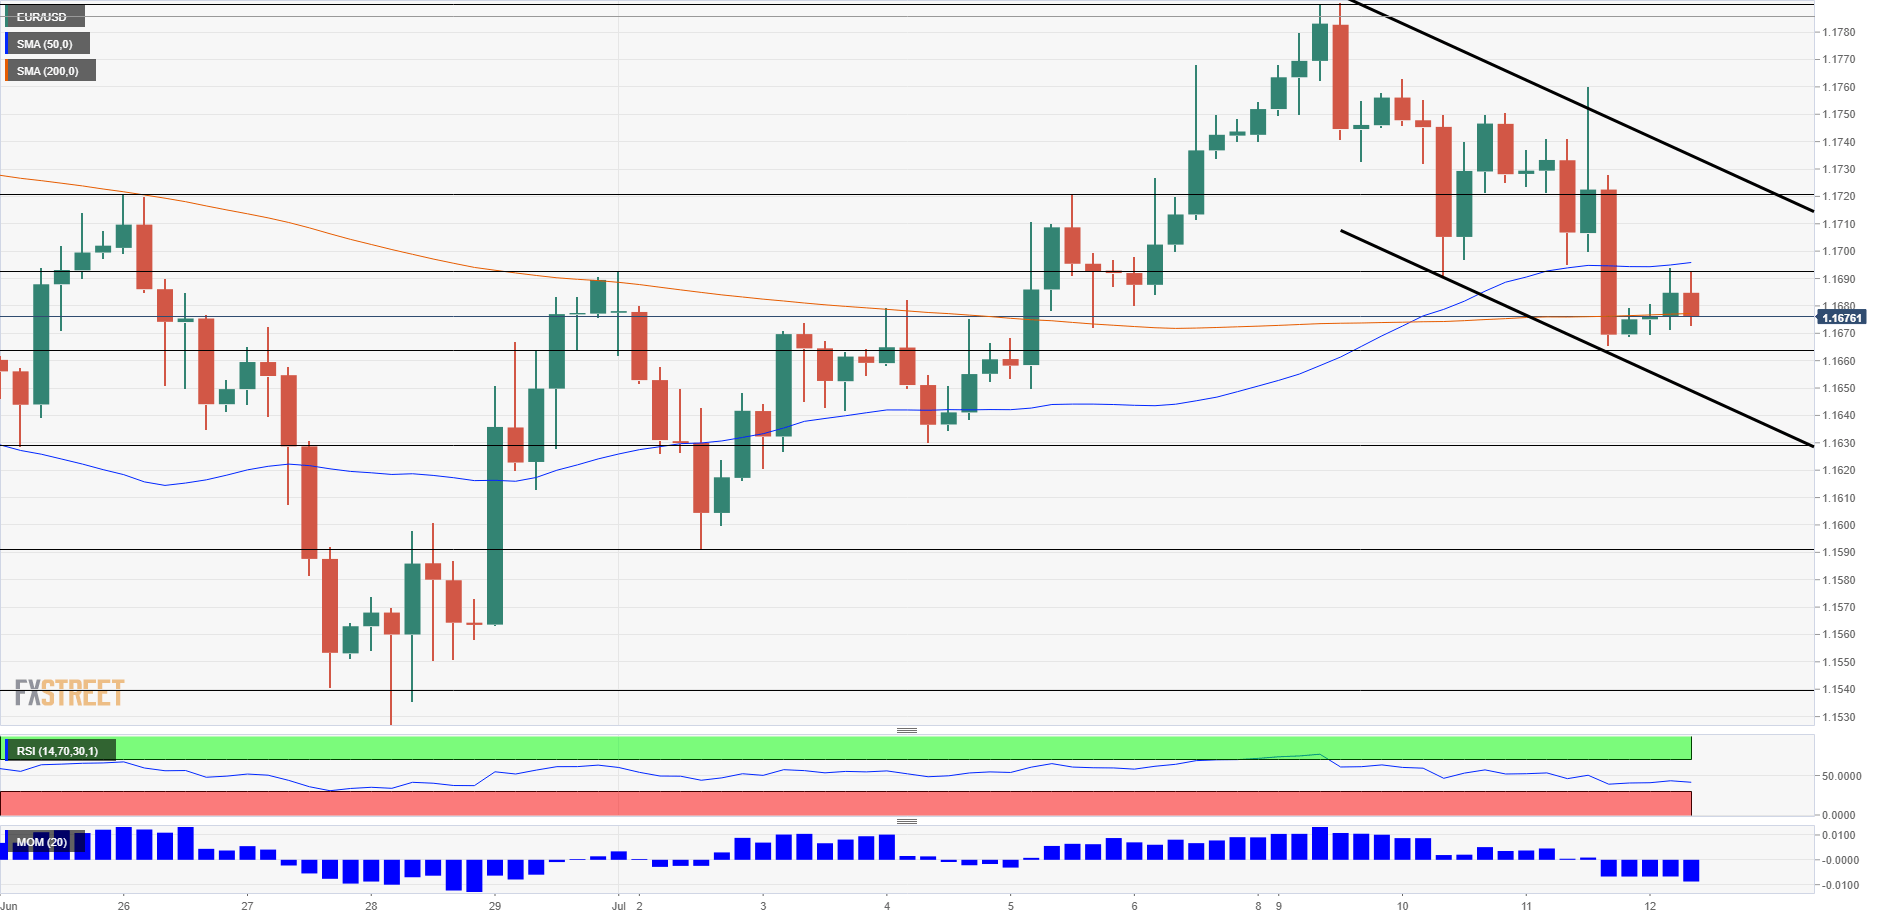 EUR USD technical analysis July 12 2018